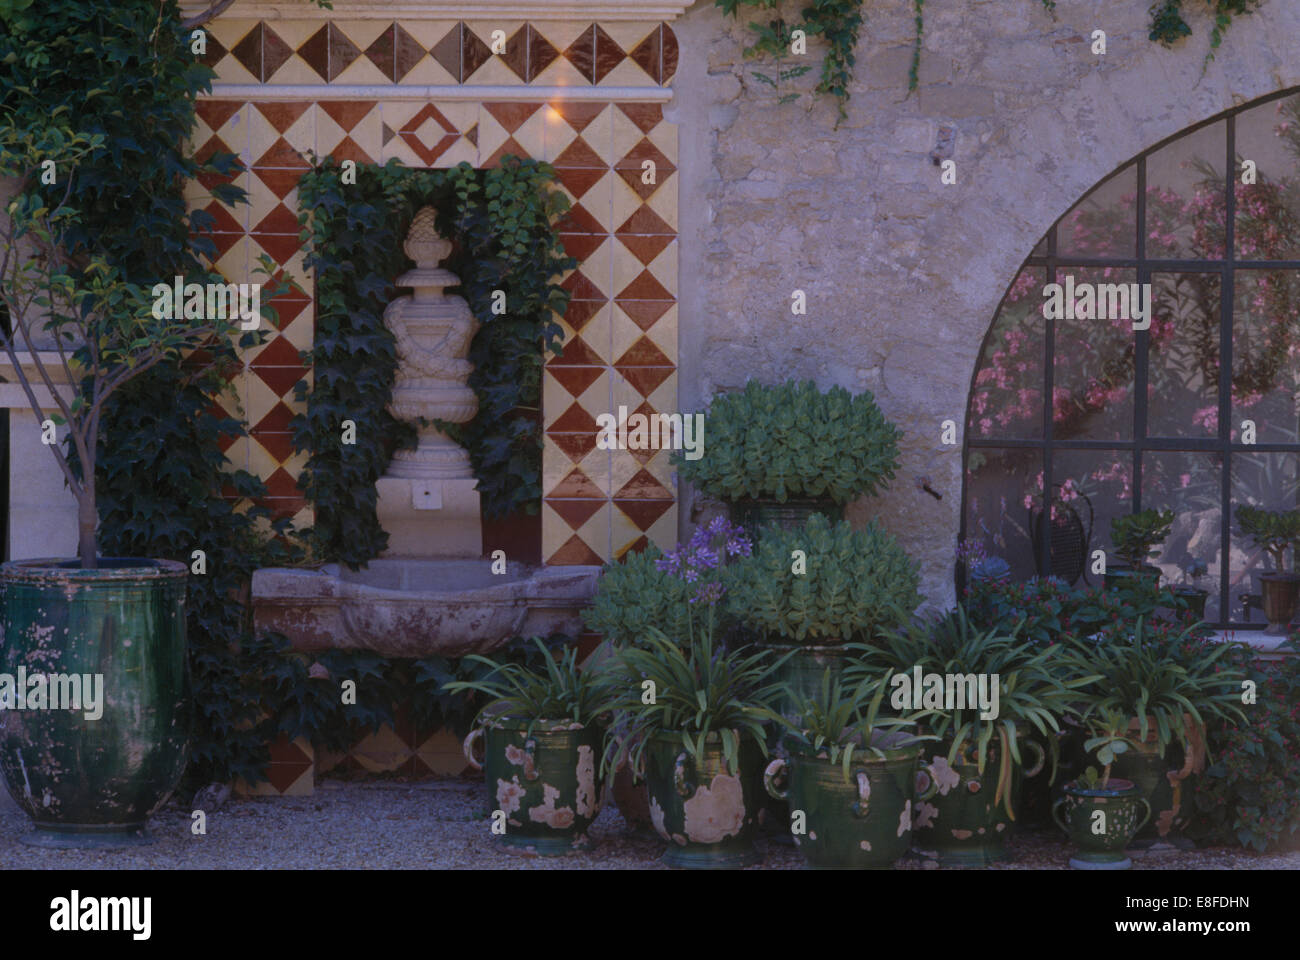 Tiled surround on alcove with stone urn in courtyard with green plants in glazed rustic pots Stock Photo